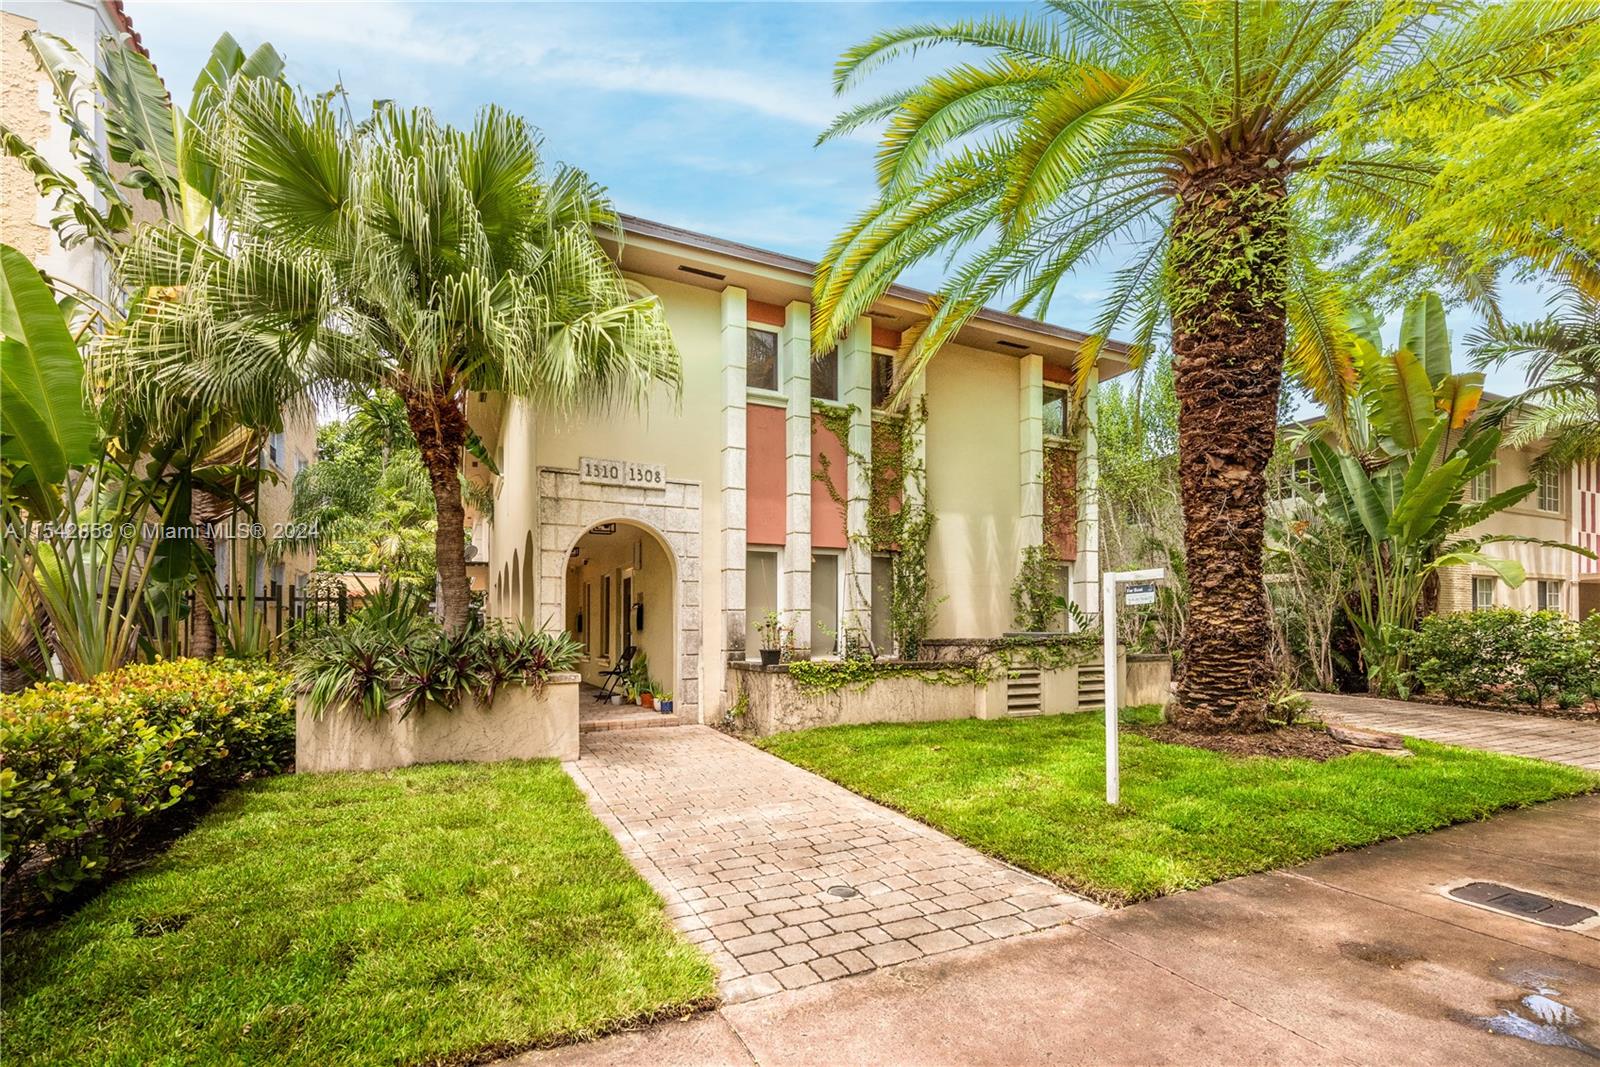 View Coral Gables, FL 33134 townhome